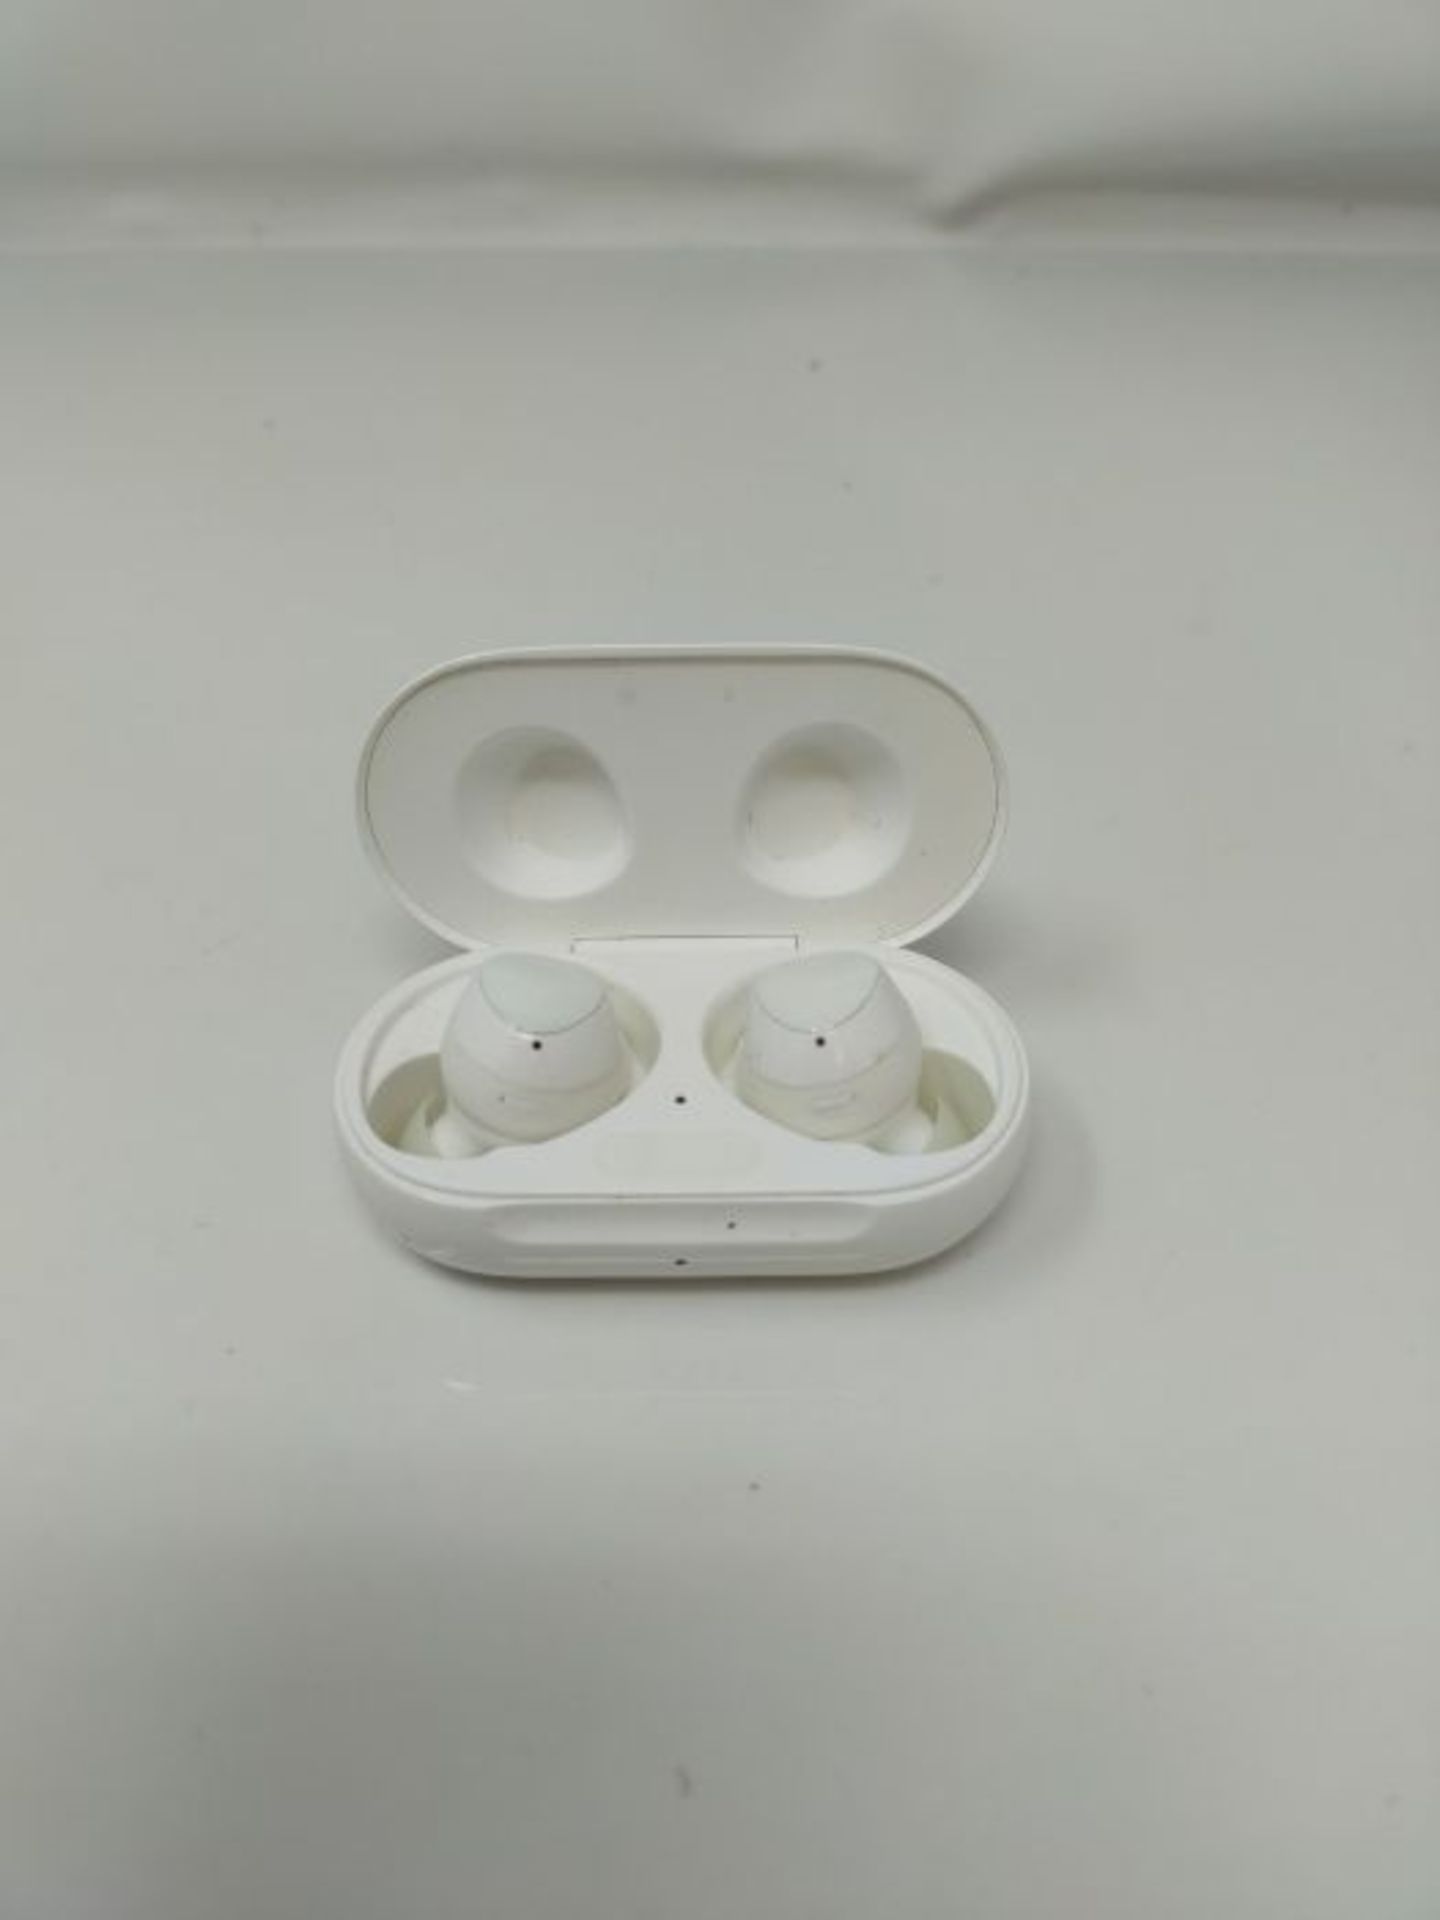 RRP £64.00 Samsung Galaxy Buds R170 - White - Image 2 of 2